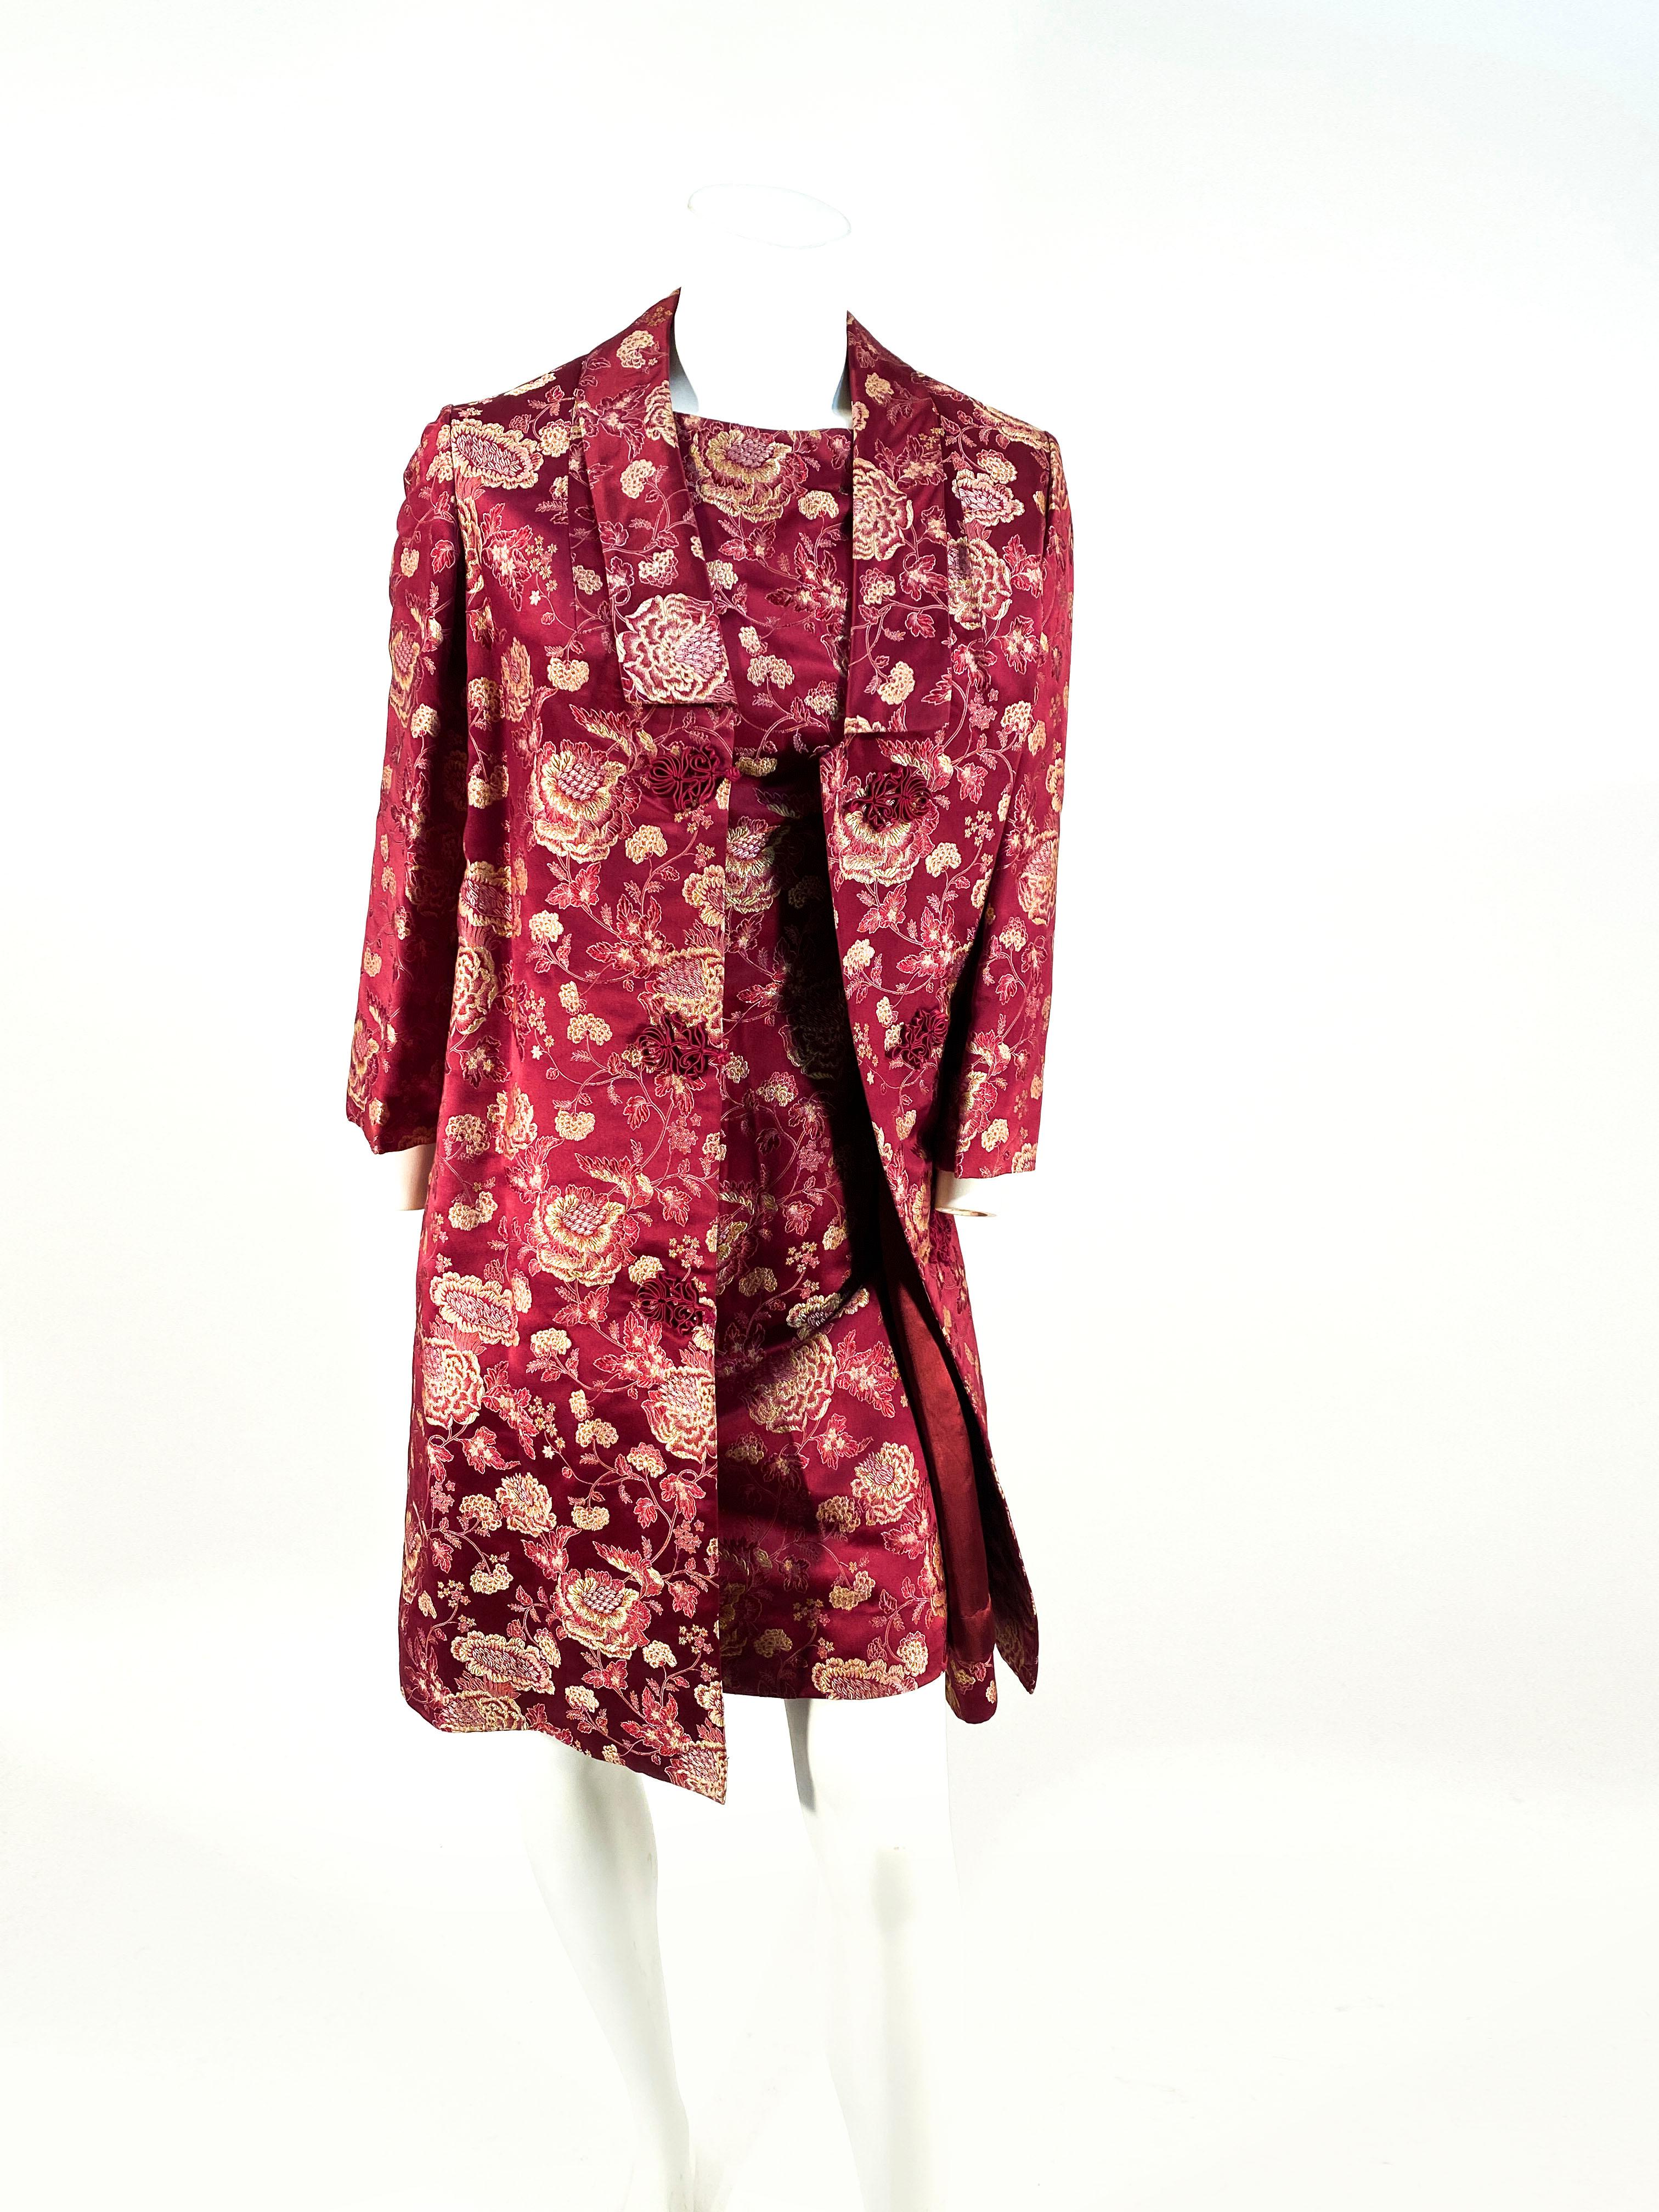 1960s Burgundy and floral brocade custom-tailored shift dress with a matching glove length sleeved coat. The coat is fully lined with interior and exterior pockets, frog closures, and a simple short shawl collar. 